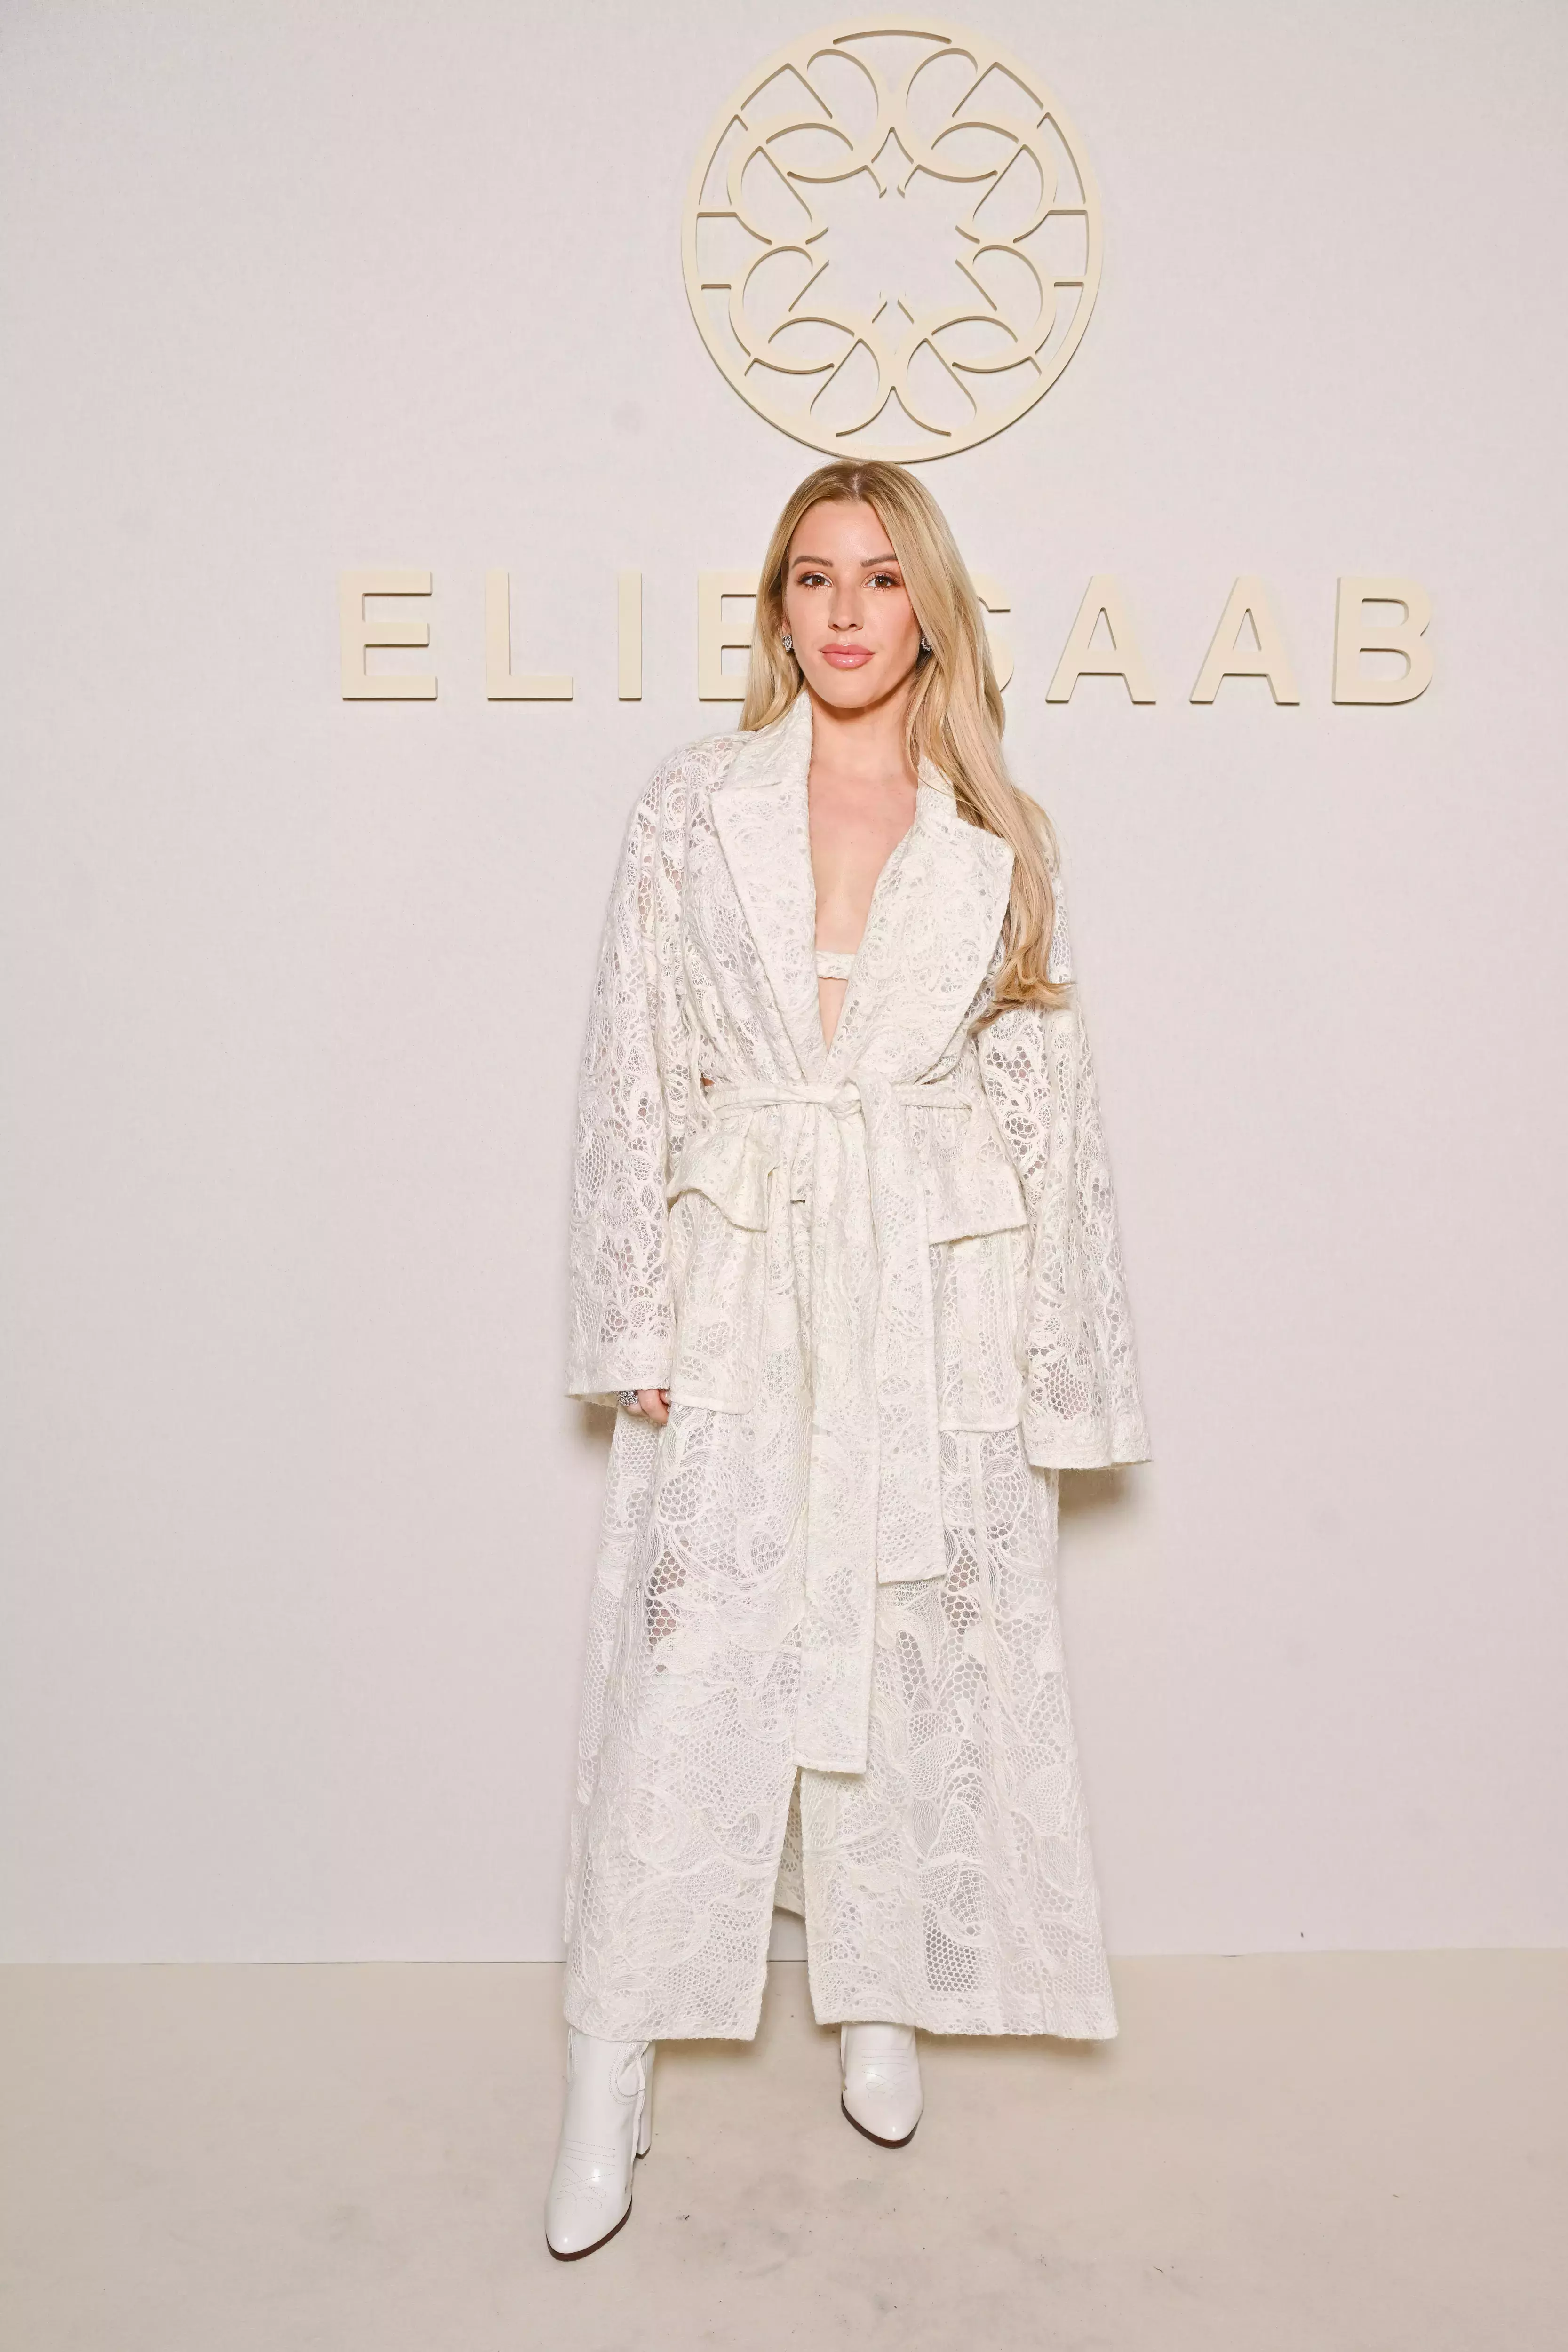 Ellie Goulding Dazzles In Elie Saab At Haute Couture Show